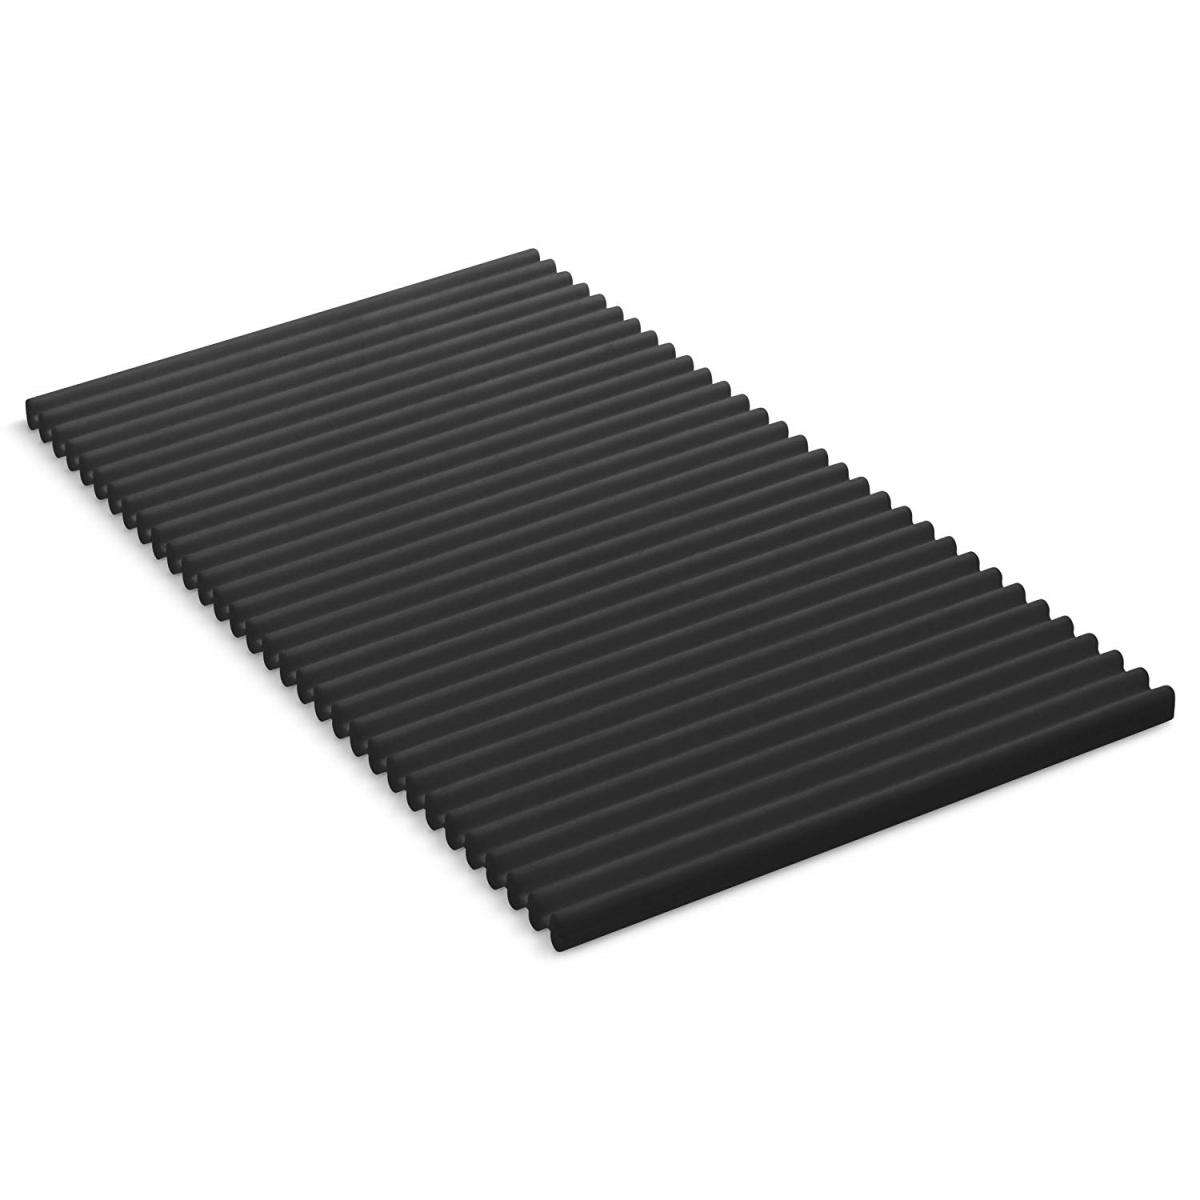 8619-chr 7 X 11.5 In. Silicone Trivet Set, Charcoal